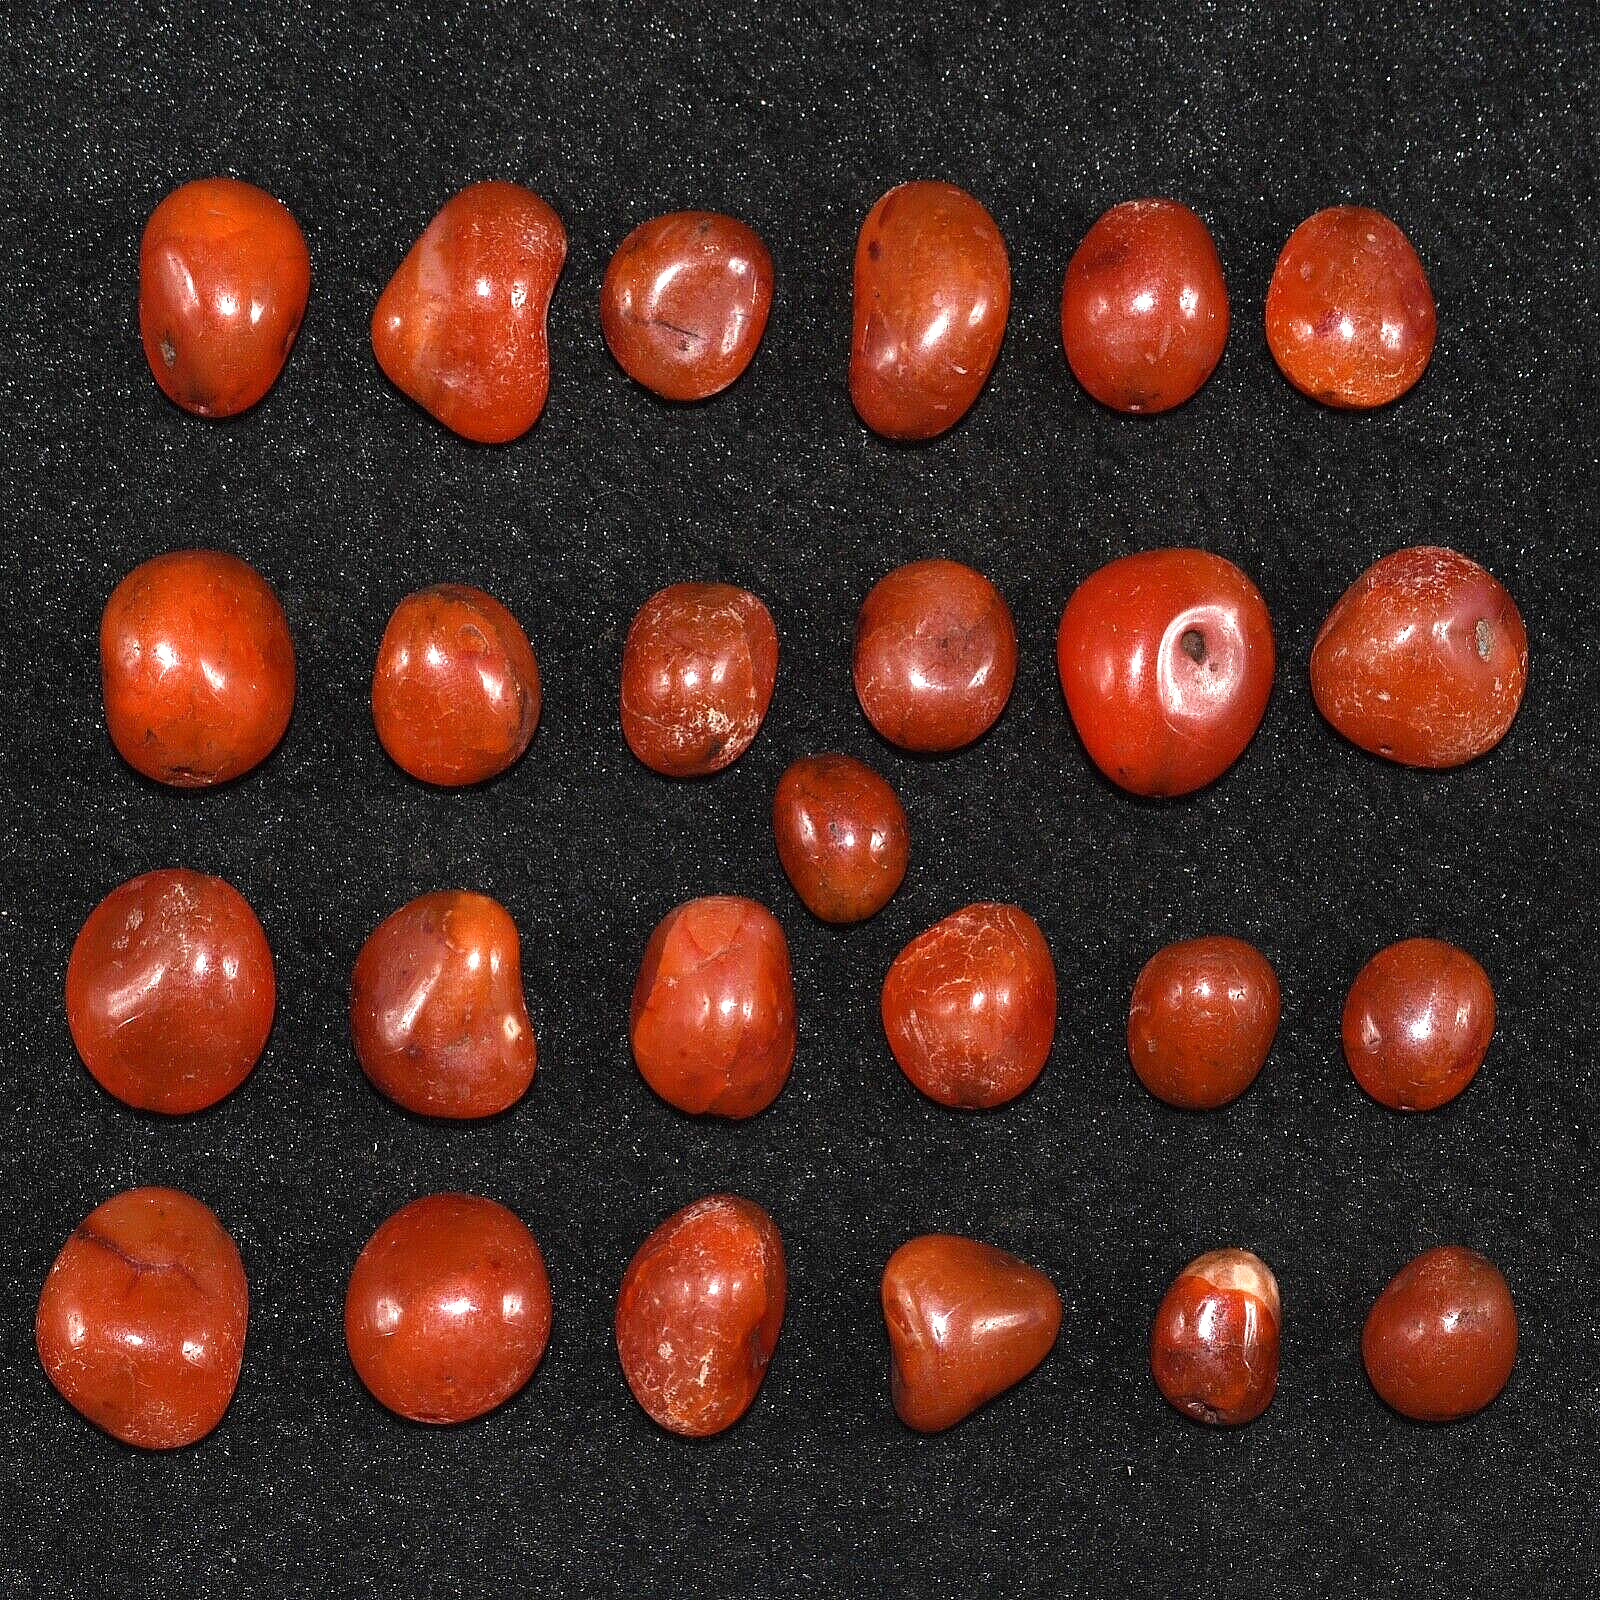 25 Ancient Large Carnelian Stone Beads in very Good Condition over 2000 Year Old